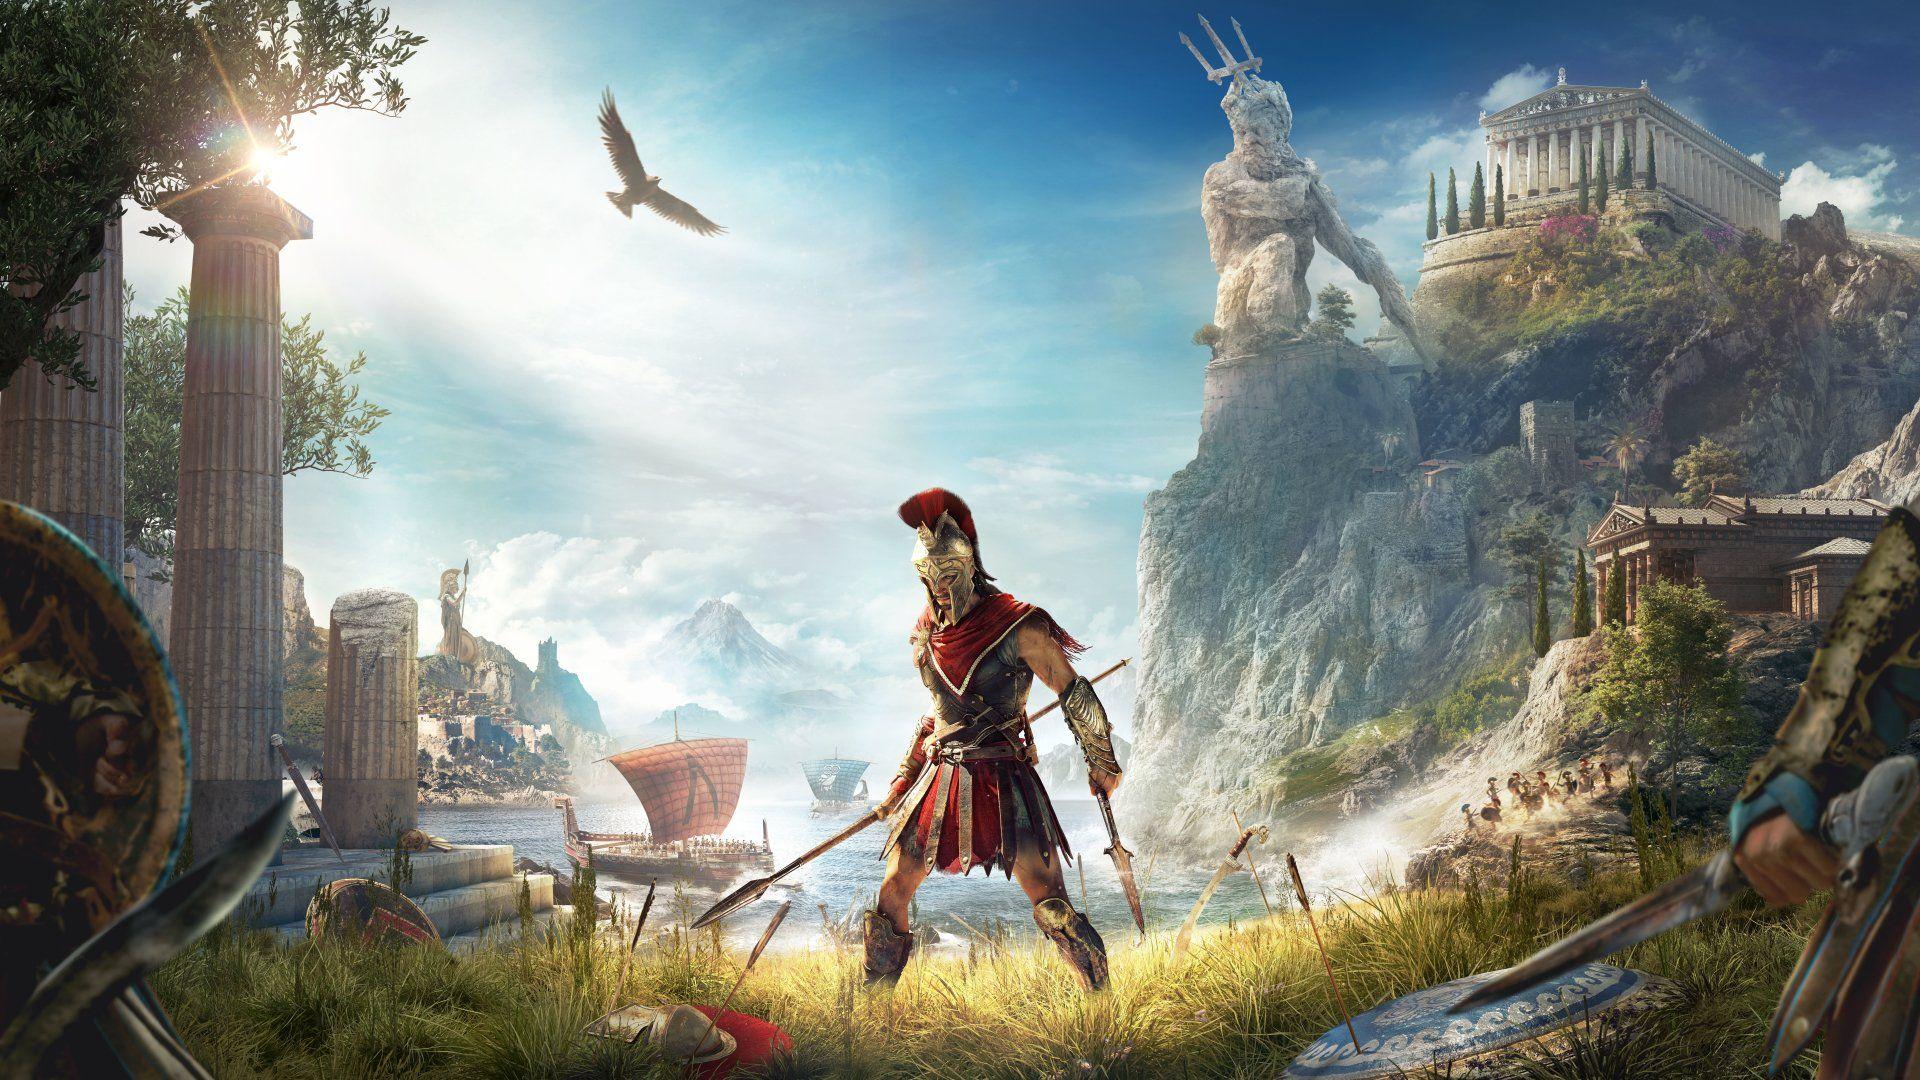 Assassin's Creed Odyssey Wallpaper Free Assassin's Creed